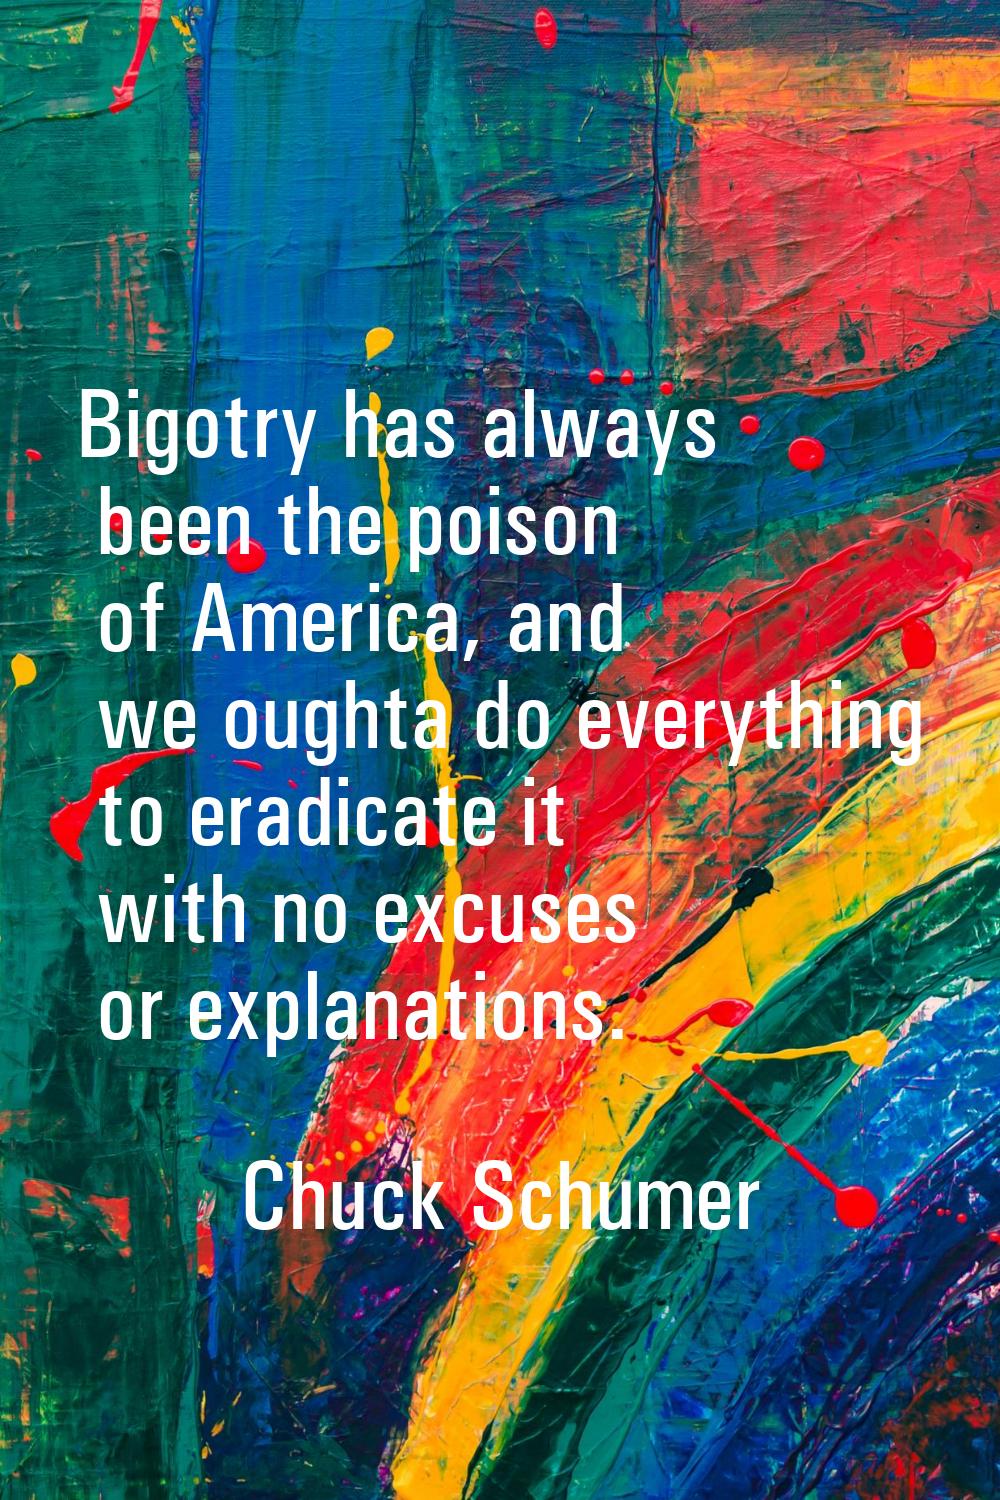 Bigotry has always been the poison of America, and we oughta do everything to eradicate it with no 